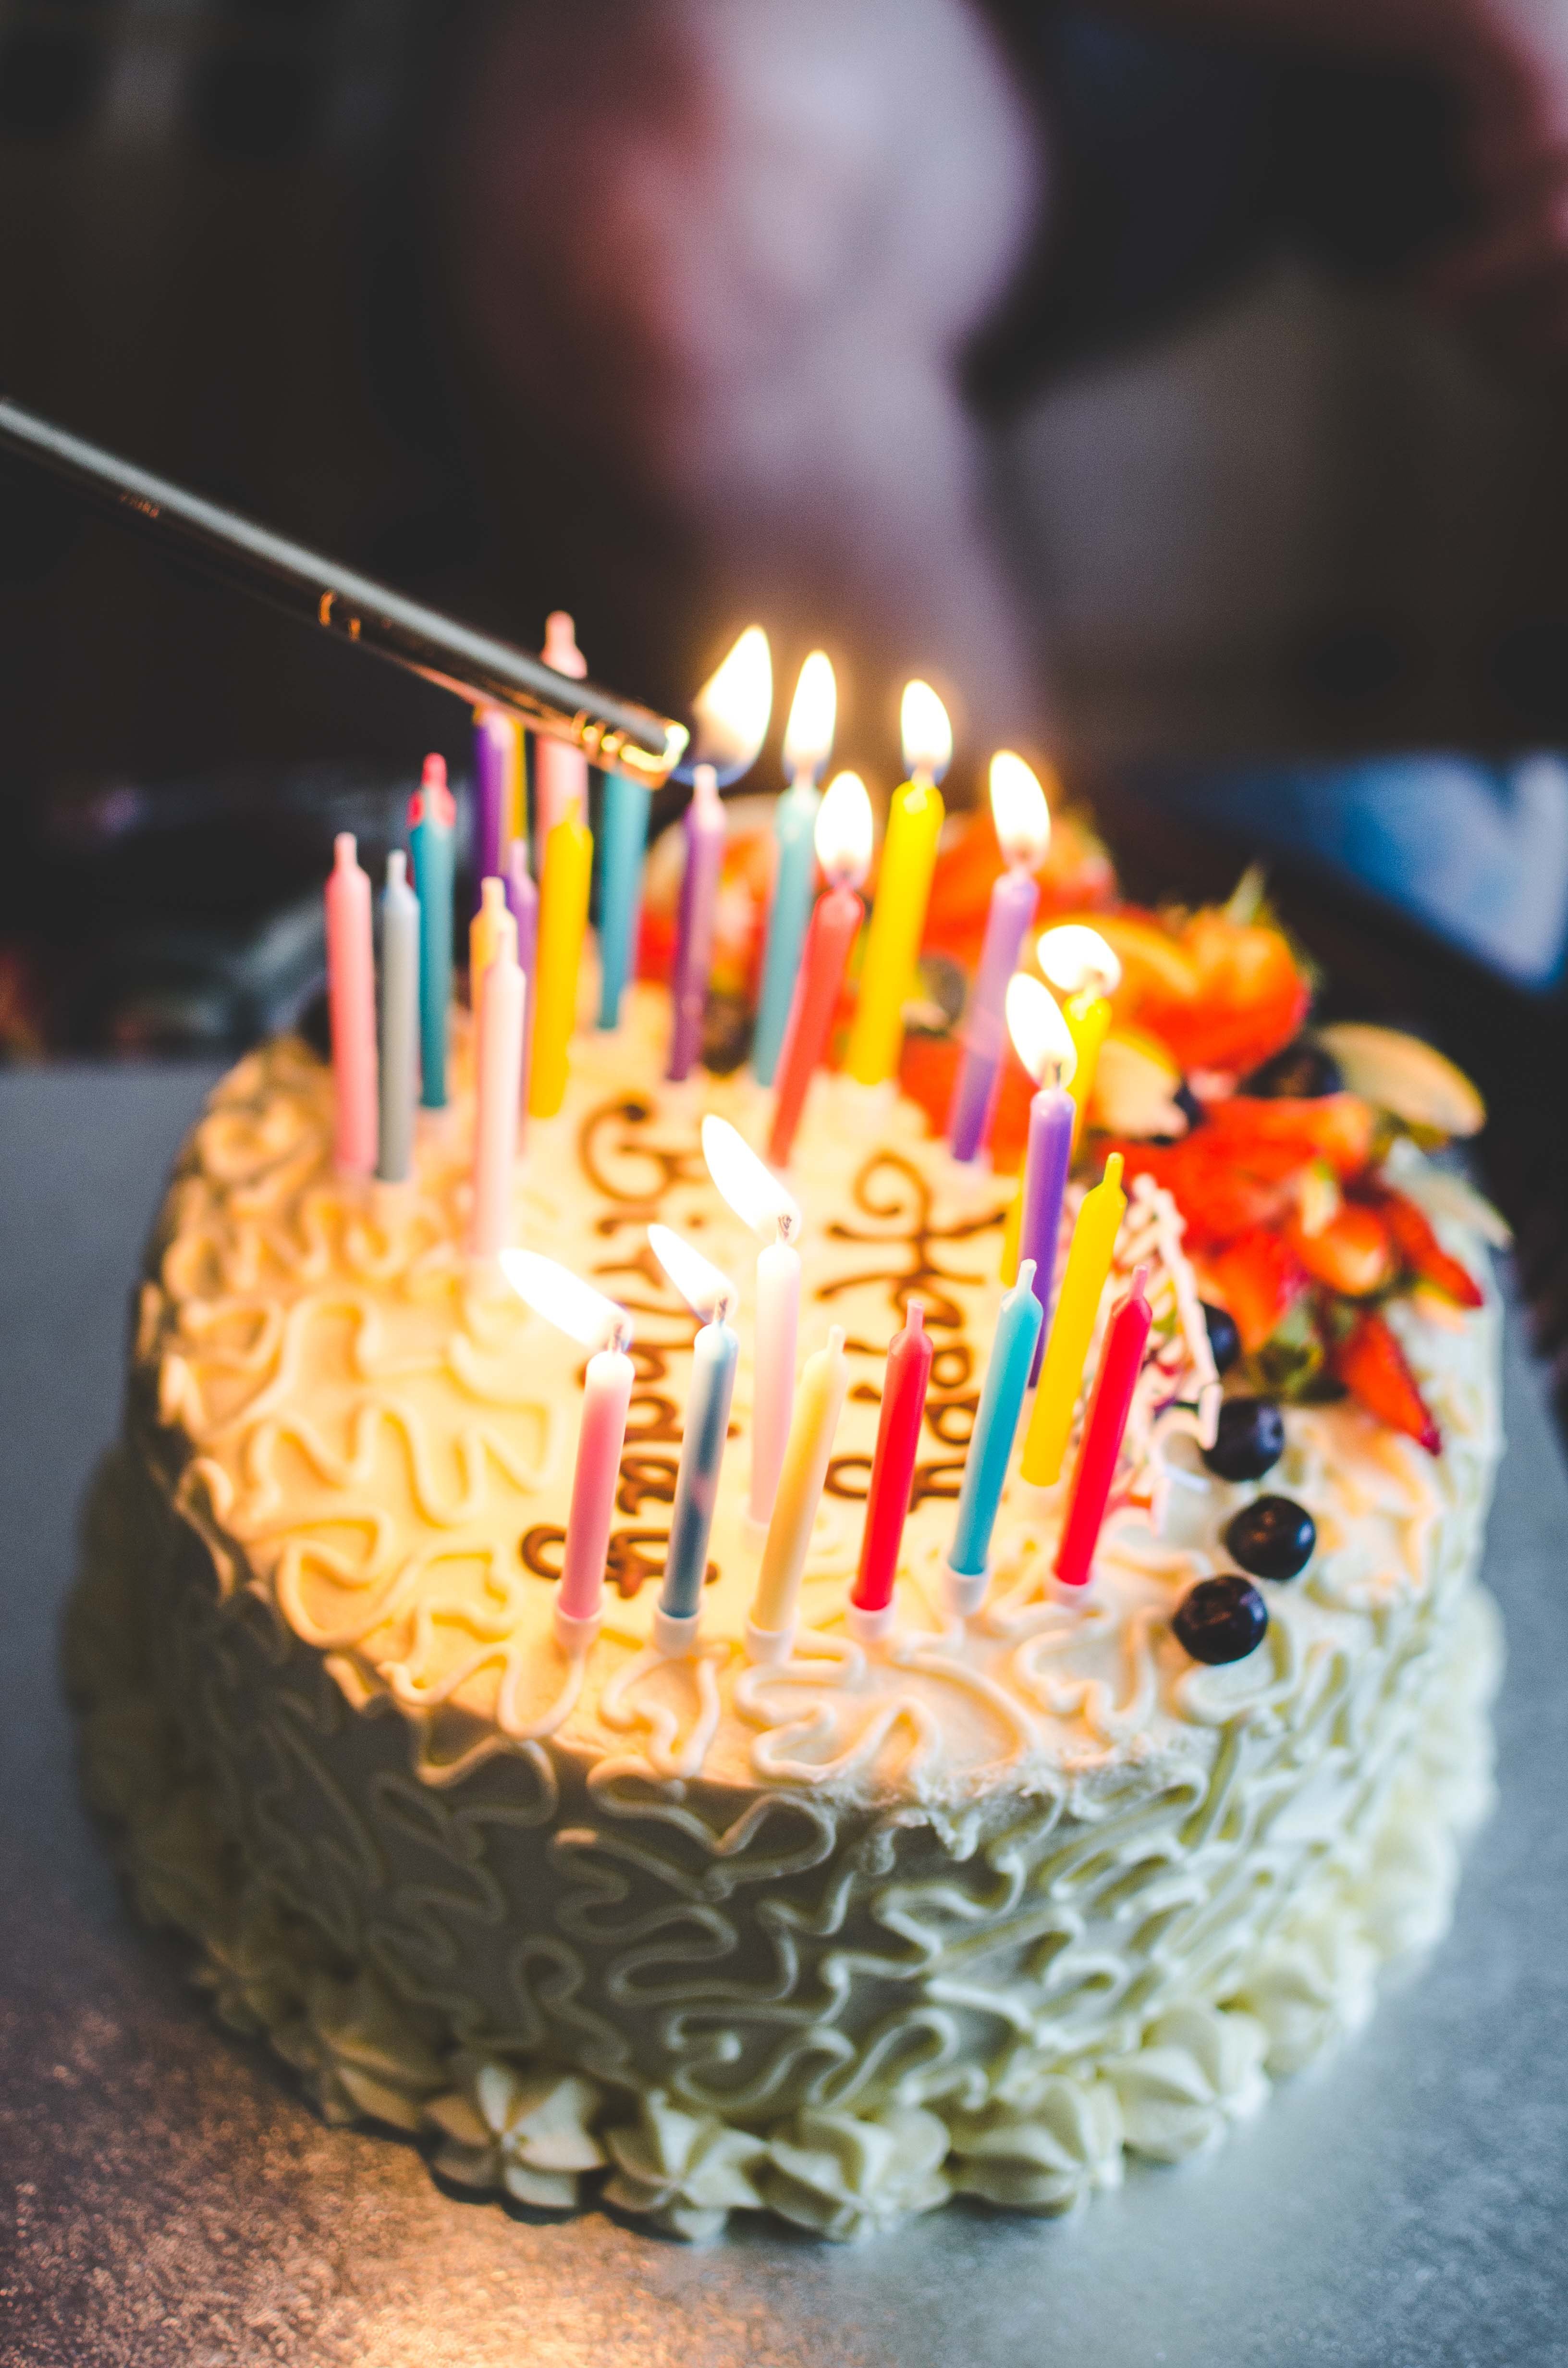 Stacey's parents planned a birthday party for her. | Photo: Unsplash